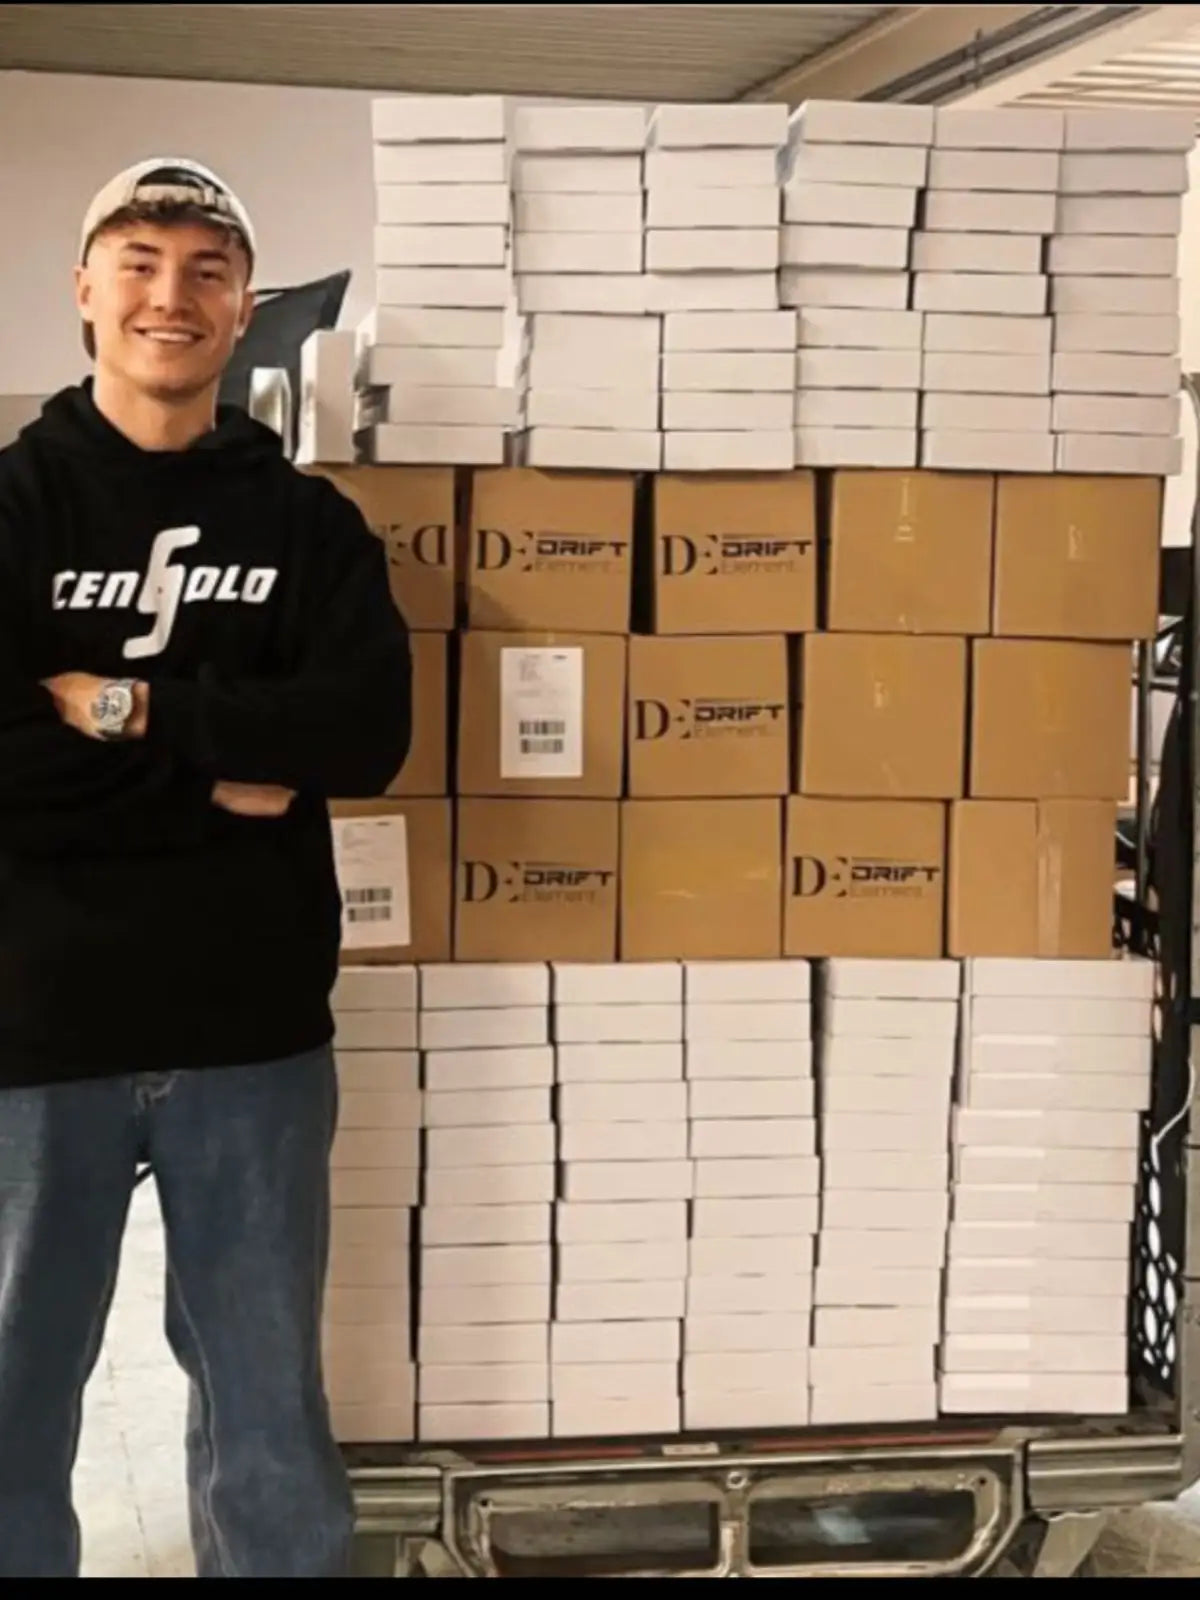 The image features a young man smiling and posing in front of a large stack of boxed products. On his wrist is a stylish watch, likely one of the rim-designed watches by DriftElement, indicative of the company's innovative product design. The boxes are labeled with the DriftElement logo, suggesting a successful batch of orders ready for shipment from this young and dynamic German startup.